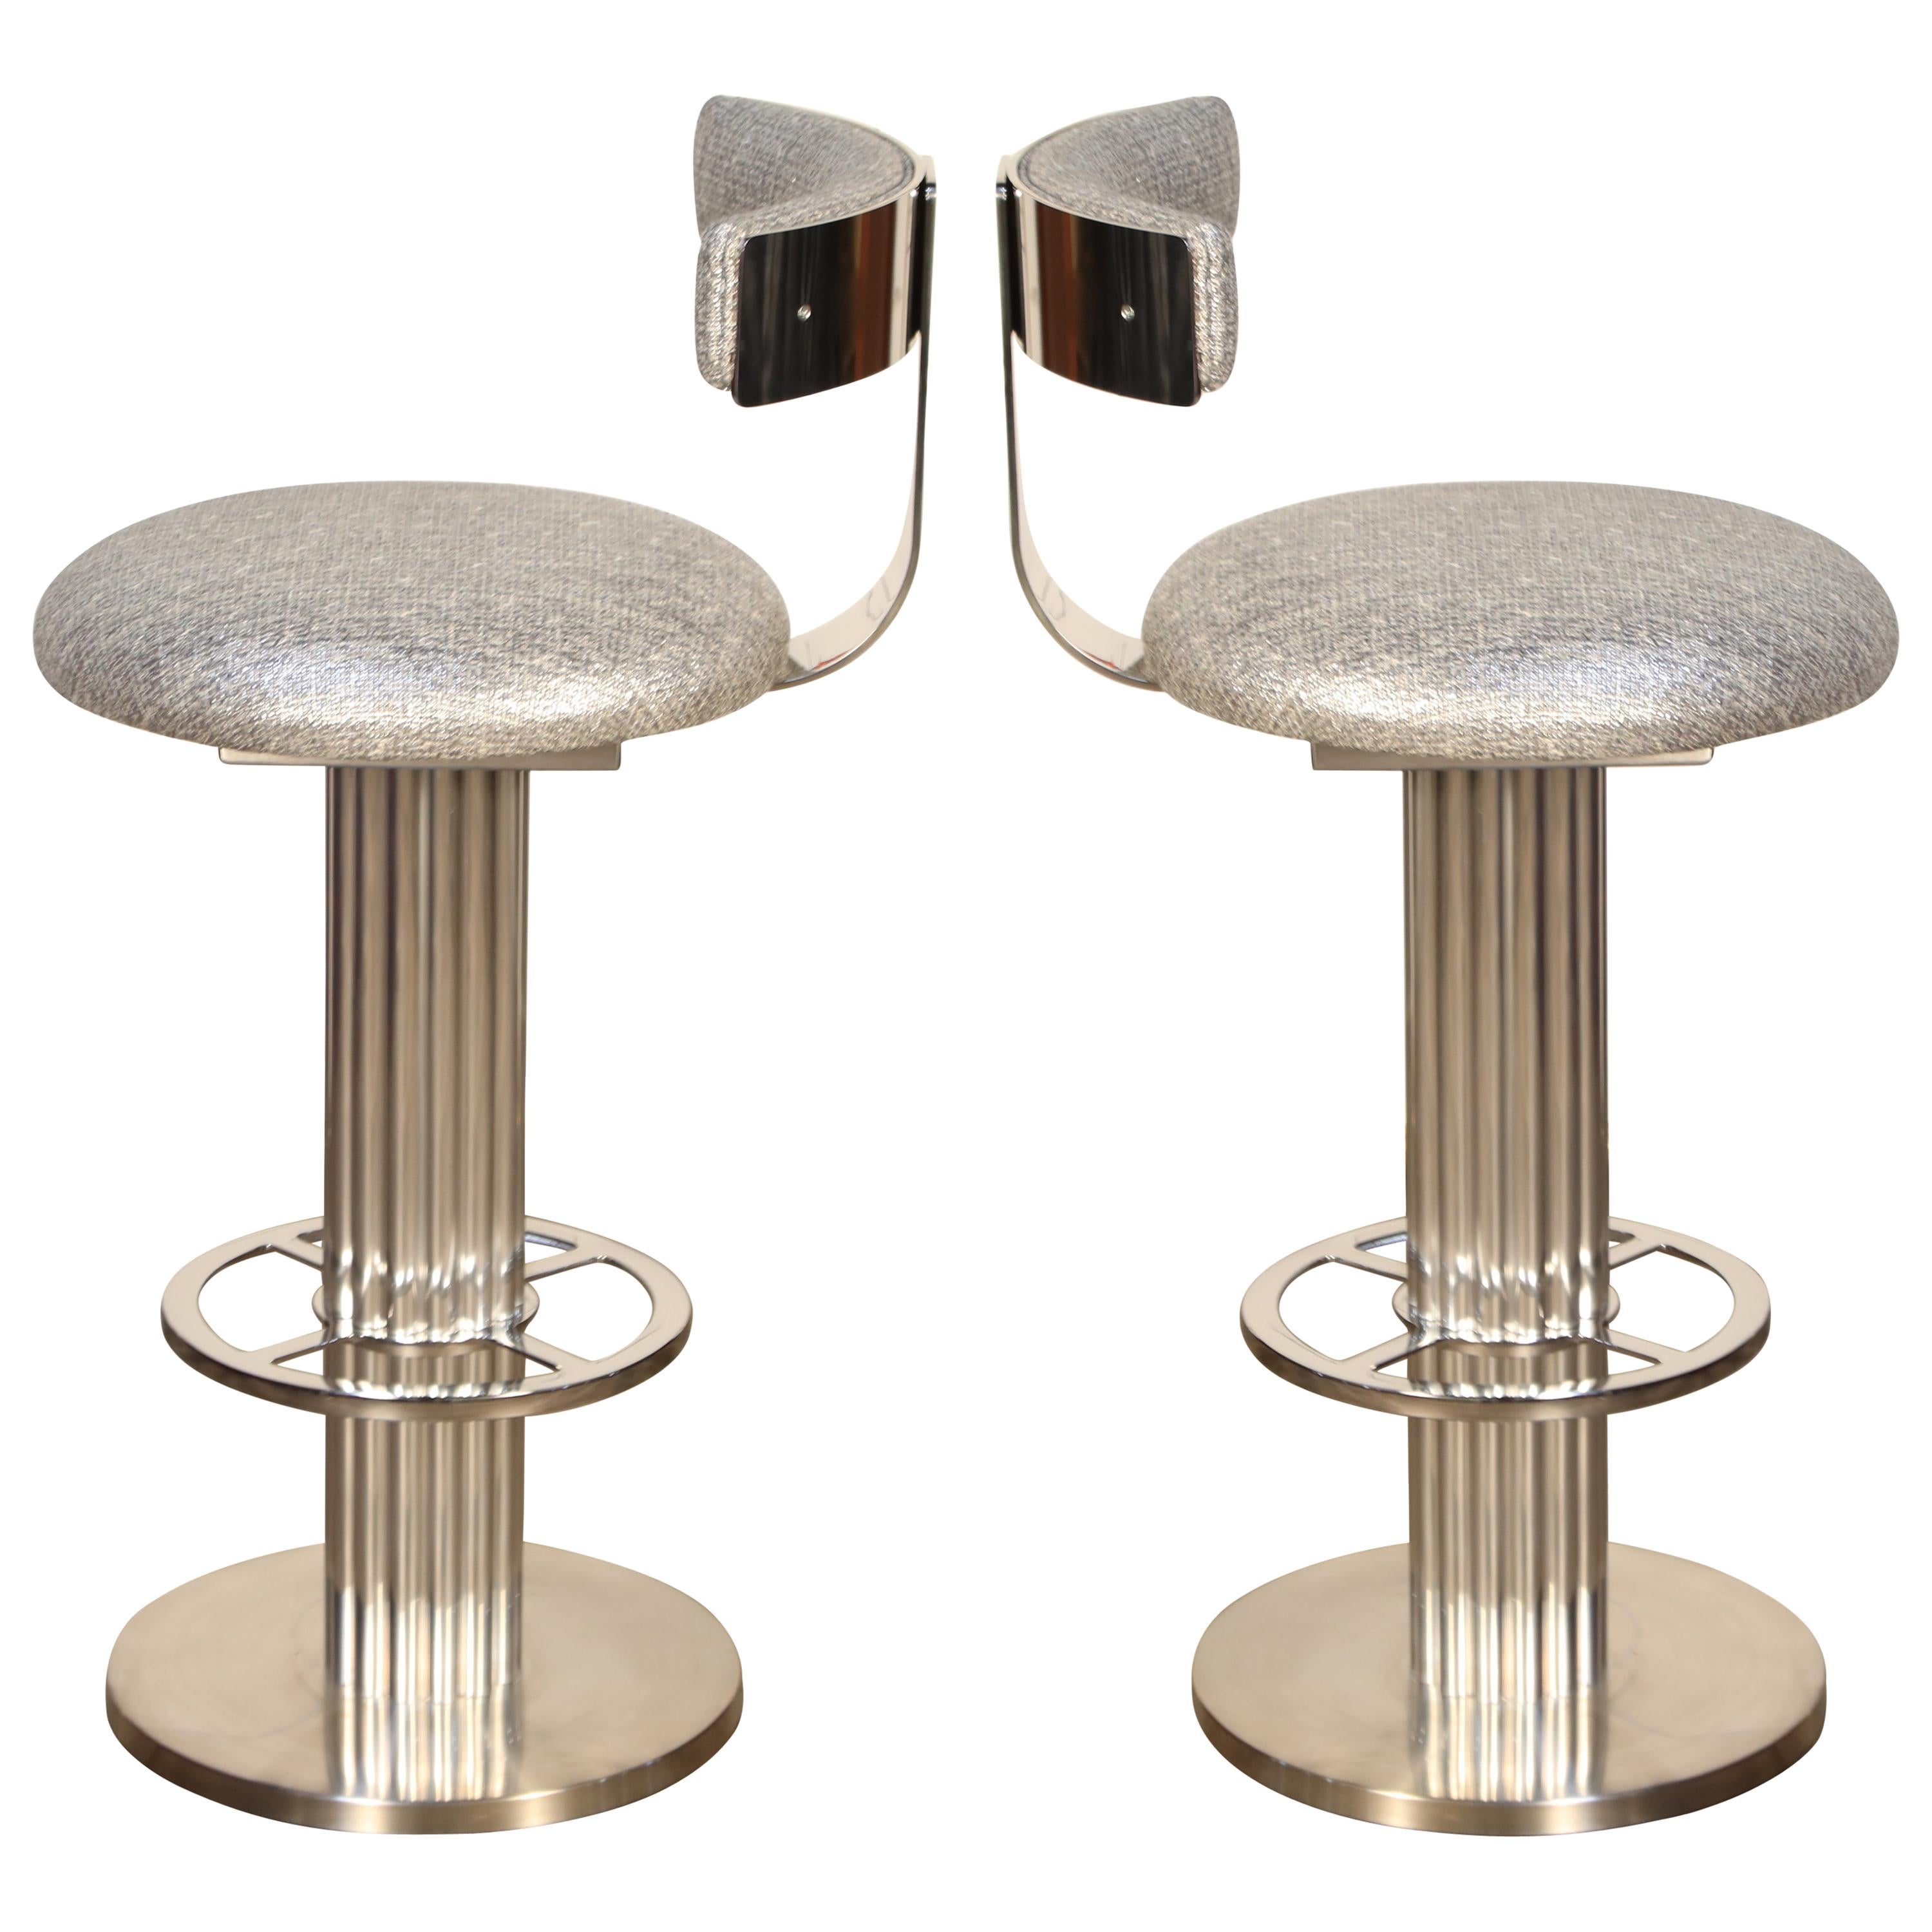 Pair of Memory Swivel Polished Aluminum Barstools by Designs for Leisure, 1980s